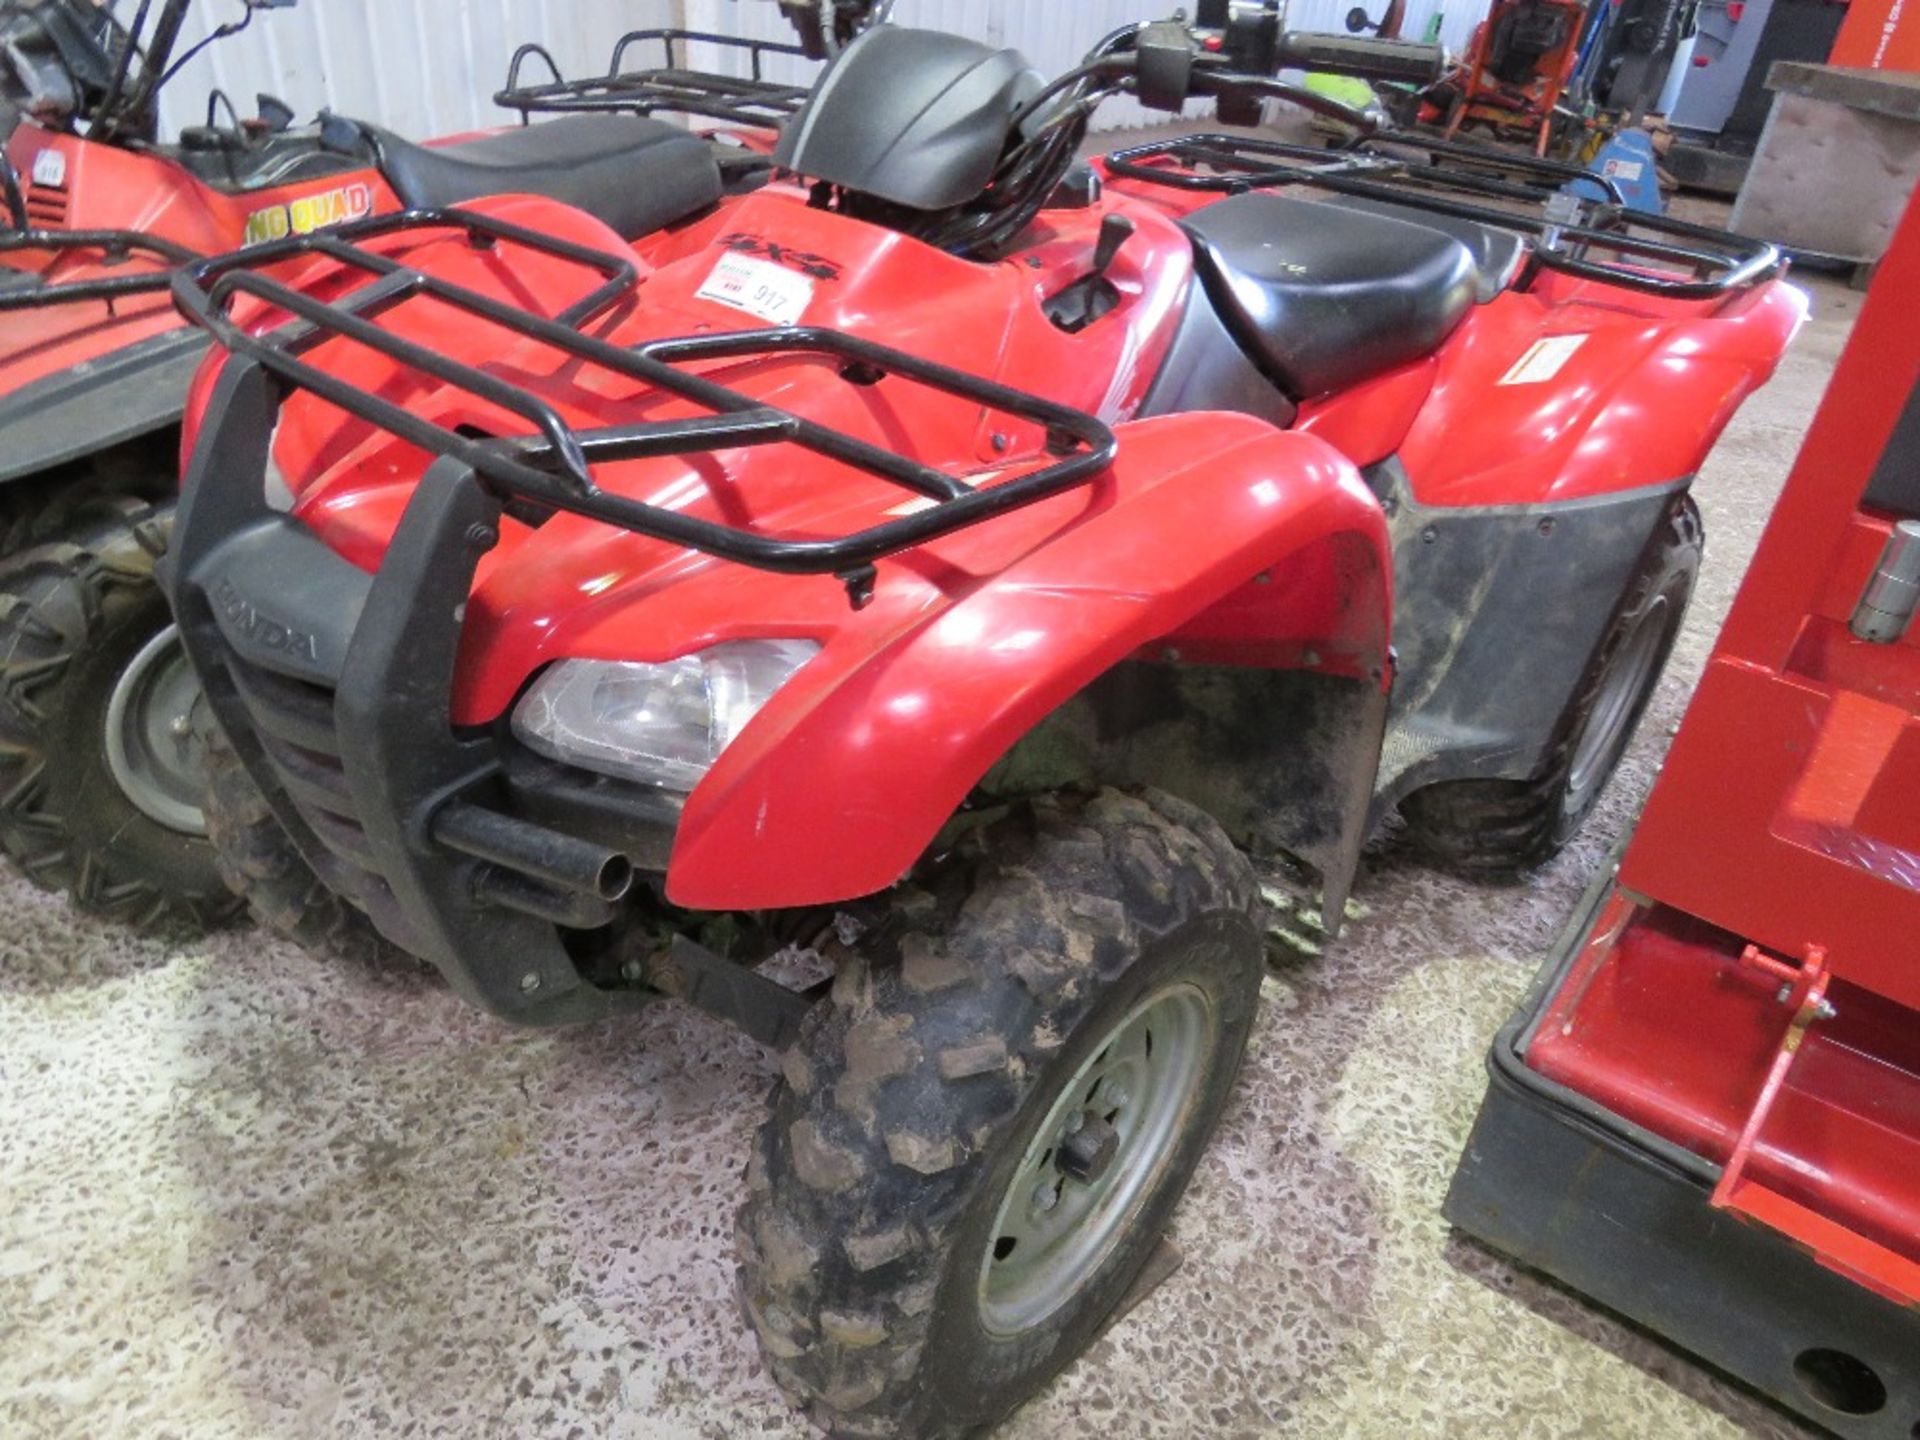 HONDA SELECTABLE 4 WHEEL DRIVE QUAD BIKE WITH ELECTRONIC GEAR SELECTION. WHEN TESTED WAS SEEN TO RUN